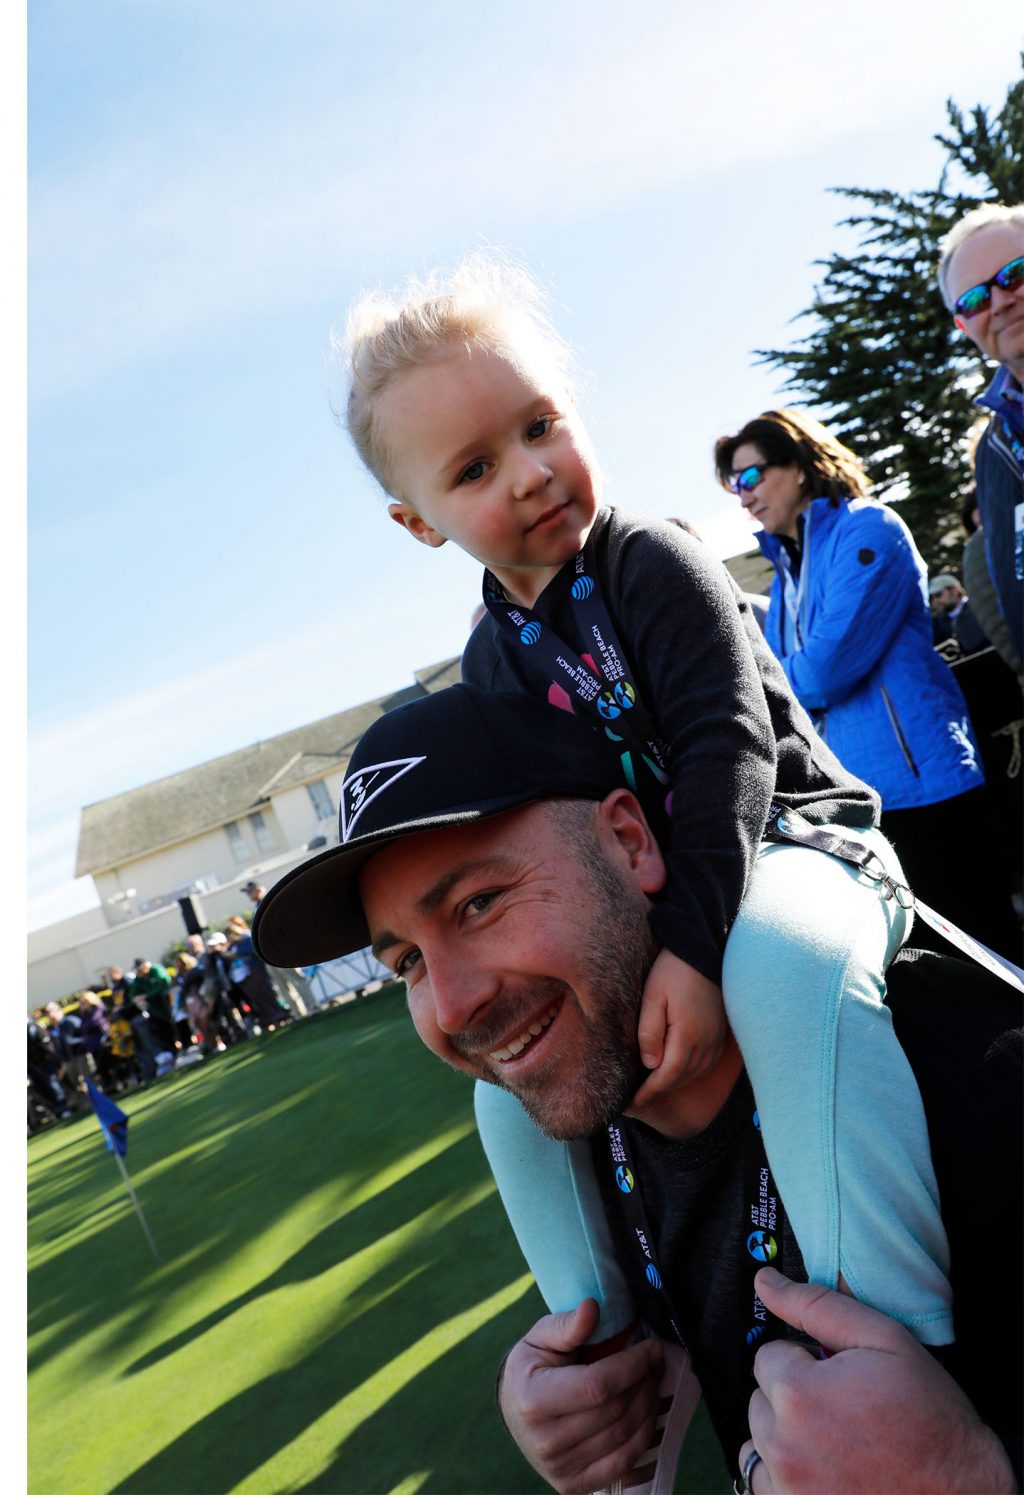 Spectators at the 2020 AT&T Pebble Beach Pro-Am